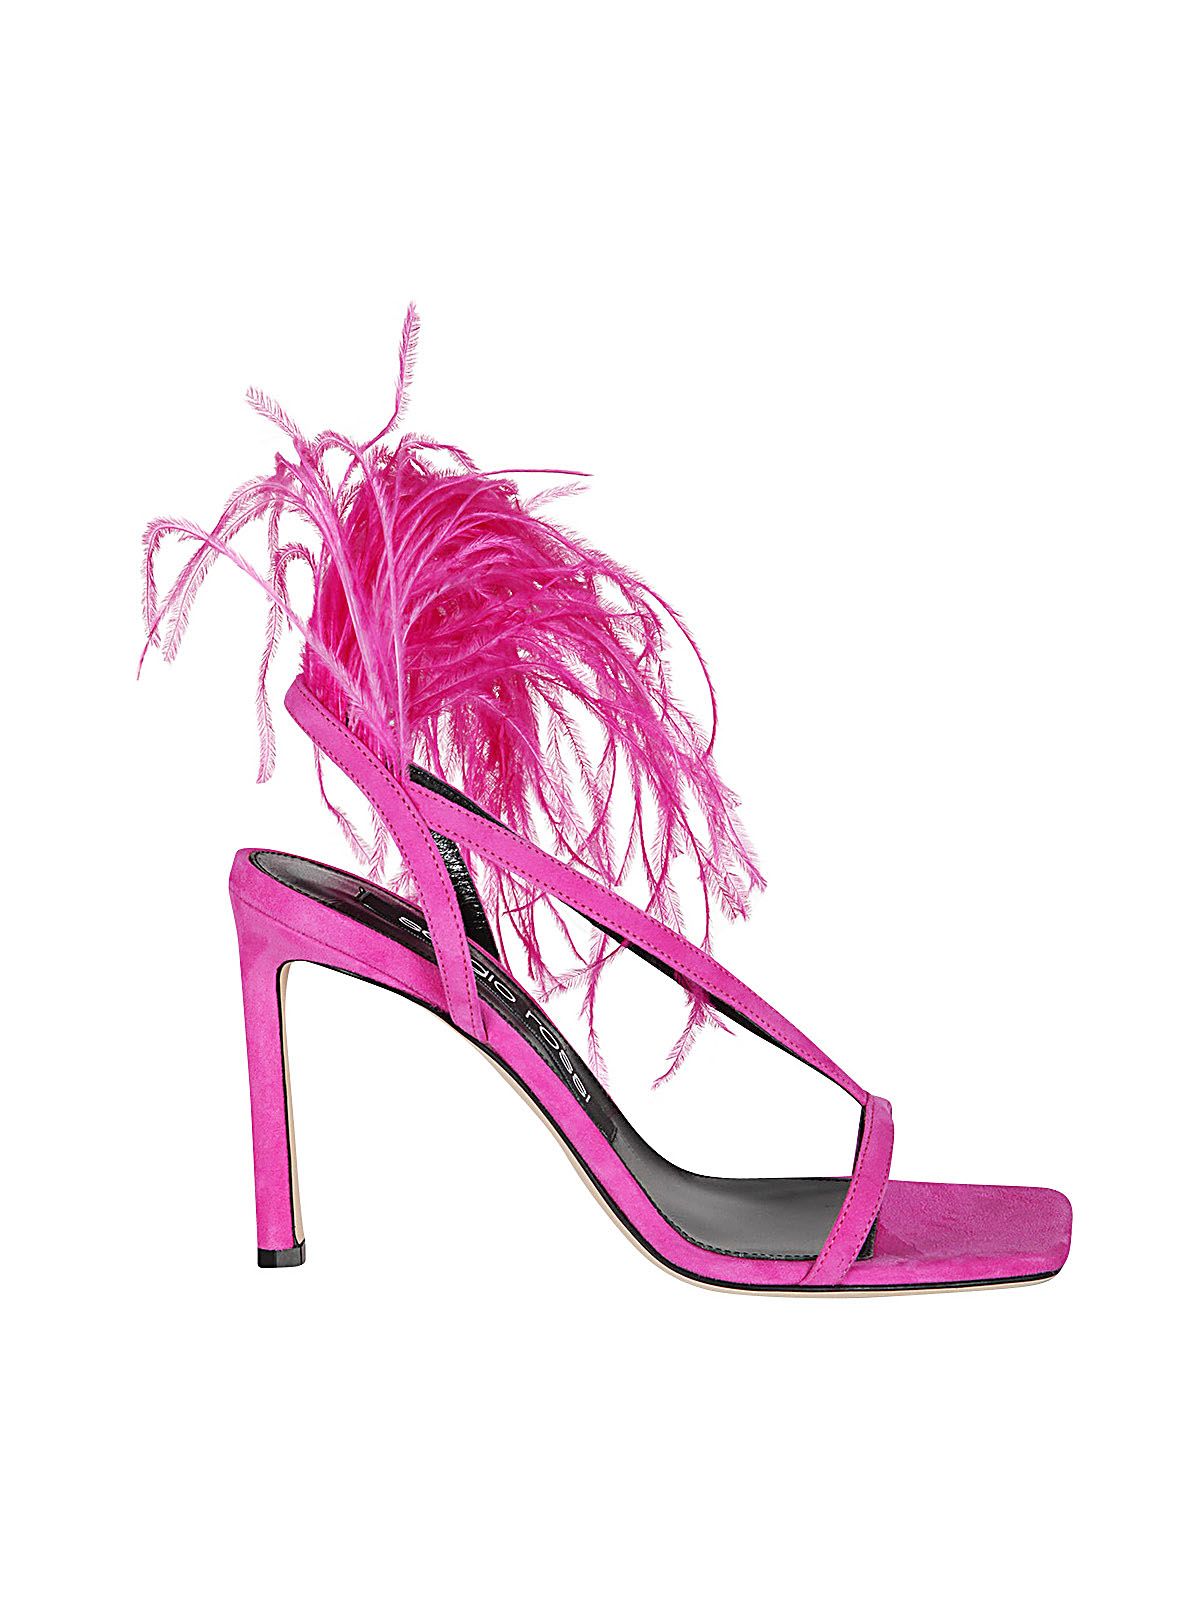 Shop Sergio Rossi Pink Sandals With Feathers Bernardellistores. Com